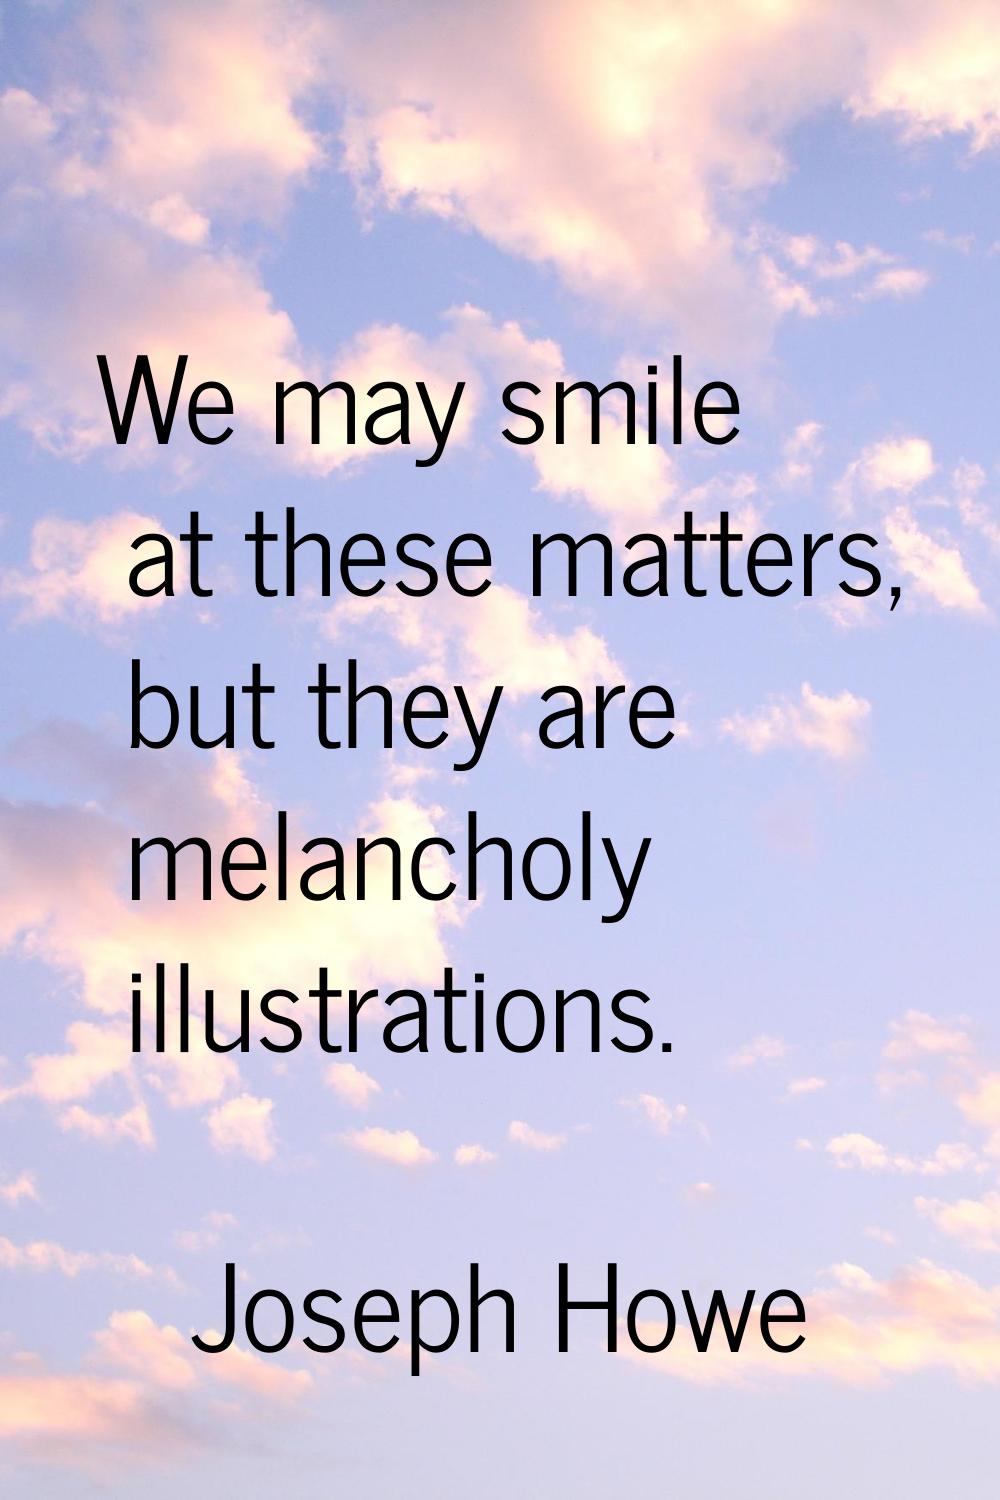 We may smile at these matters, but they are melancholy illustrations.